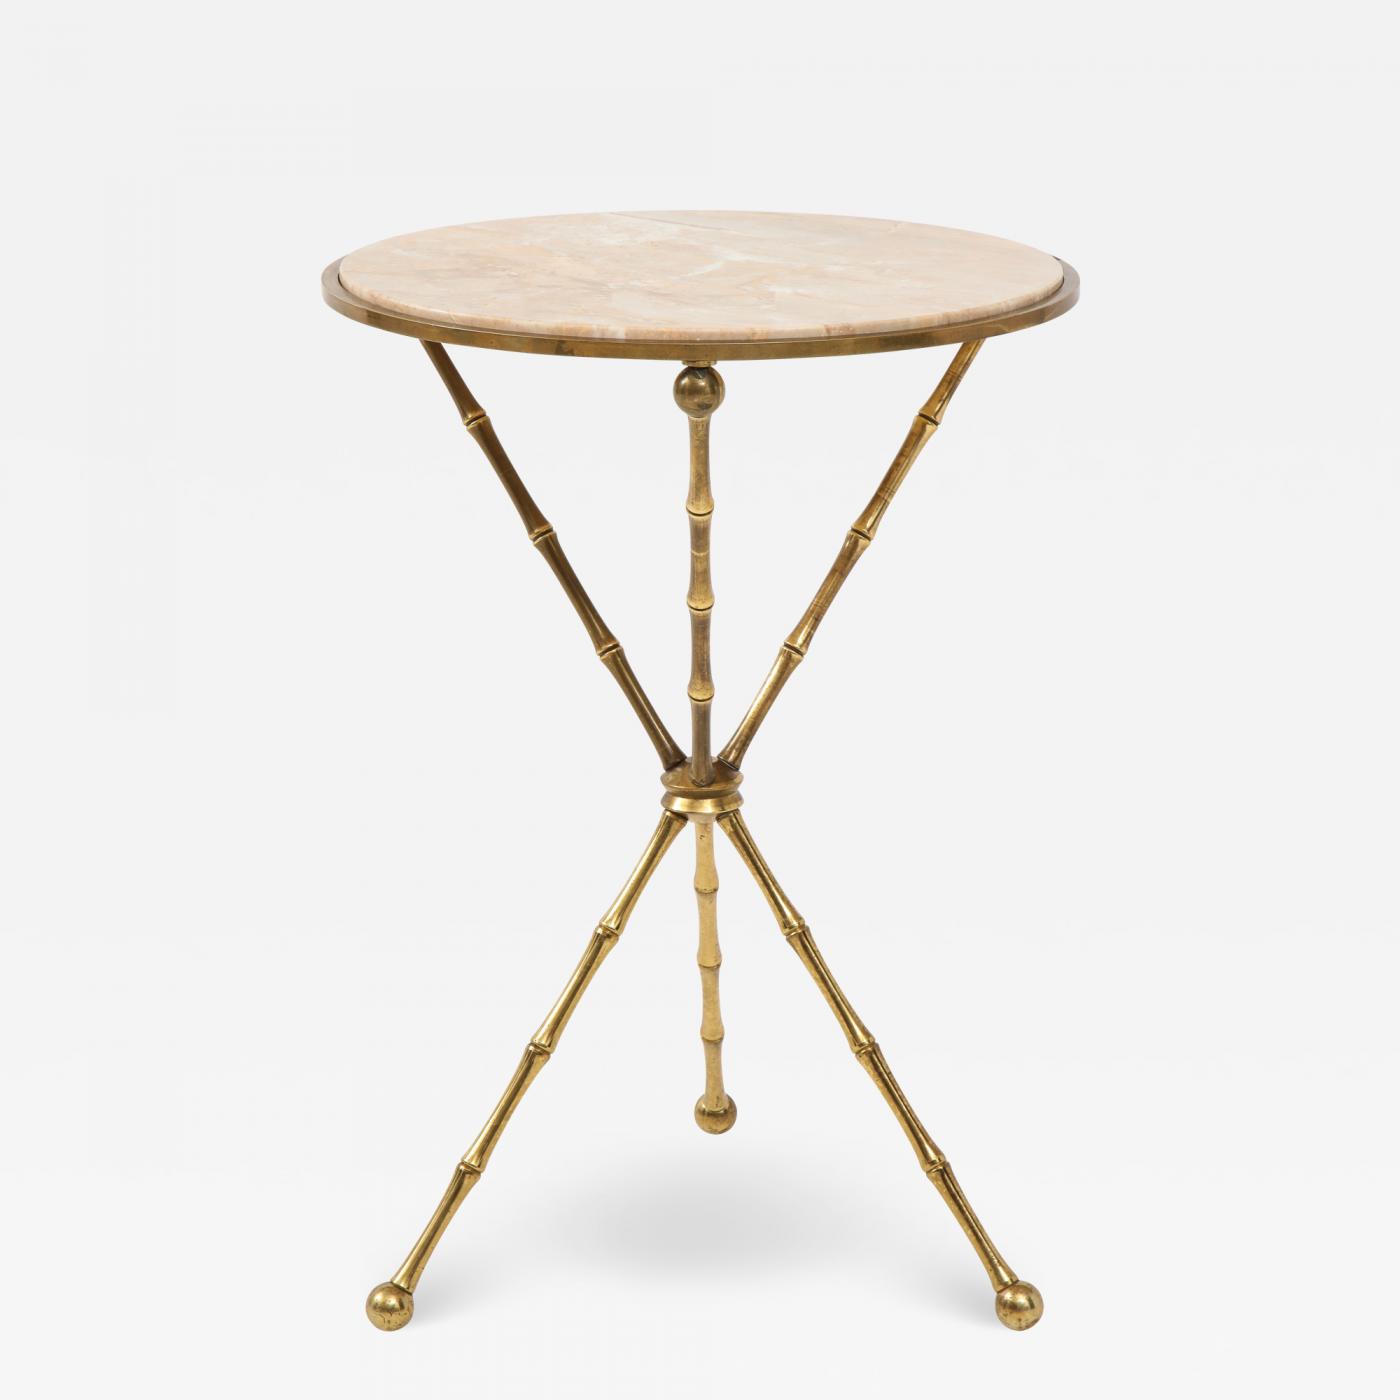 1950's Faux Bamboo Solid Brass Tripod Side Table